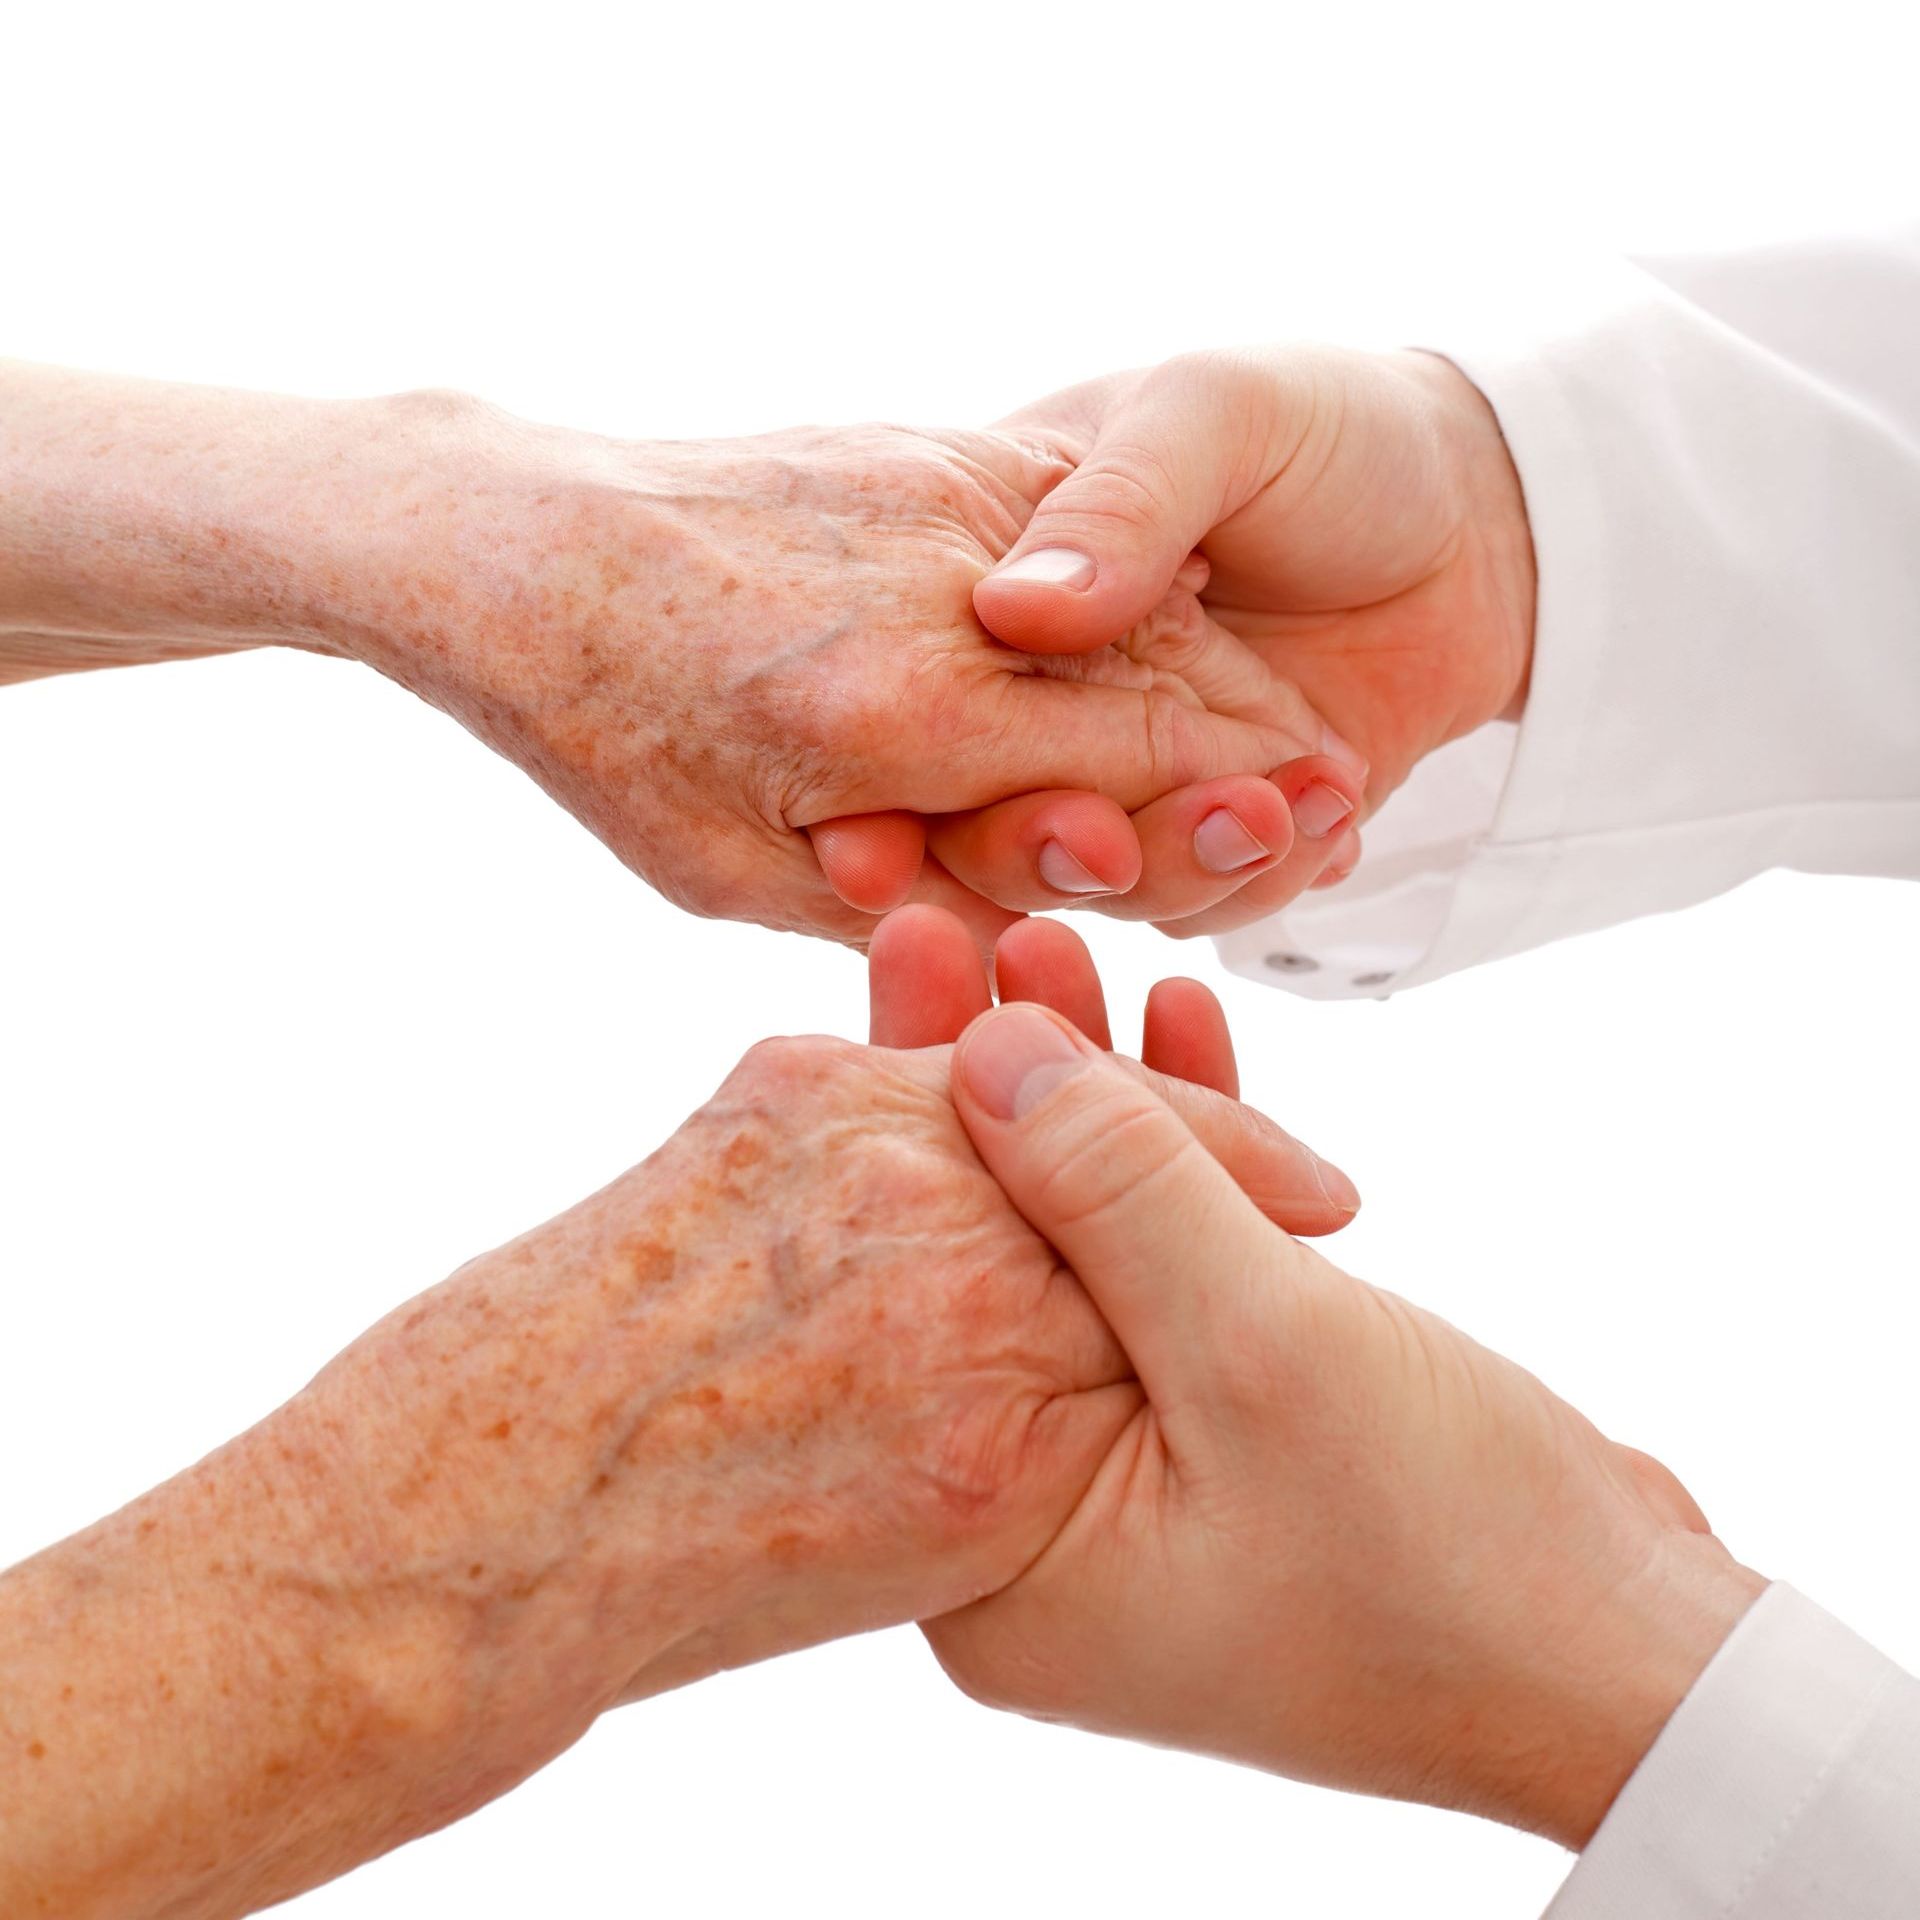 A woman is holding the hand of an older woman